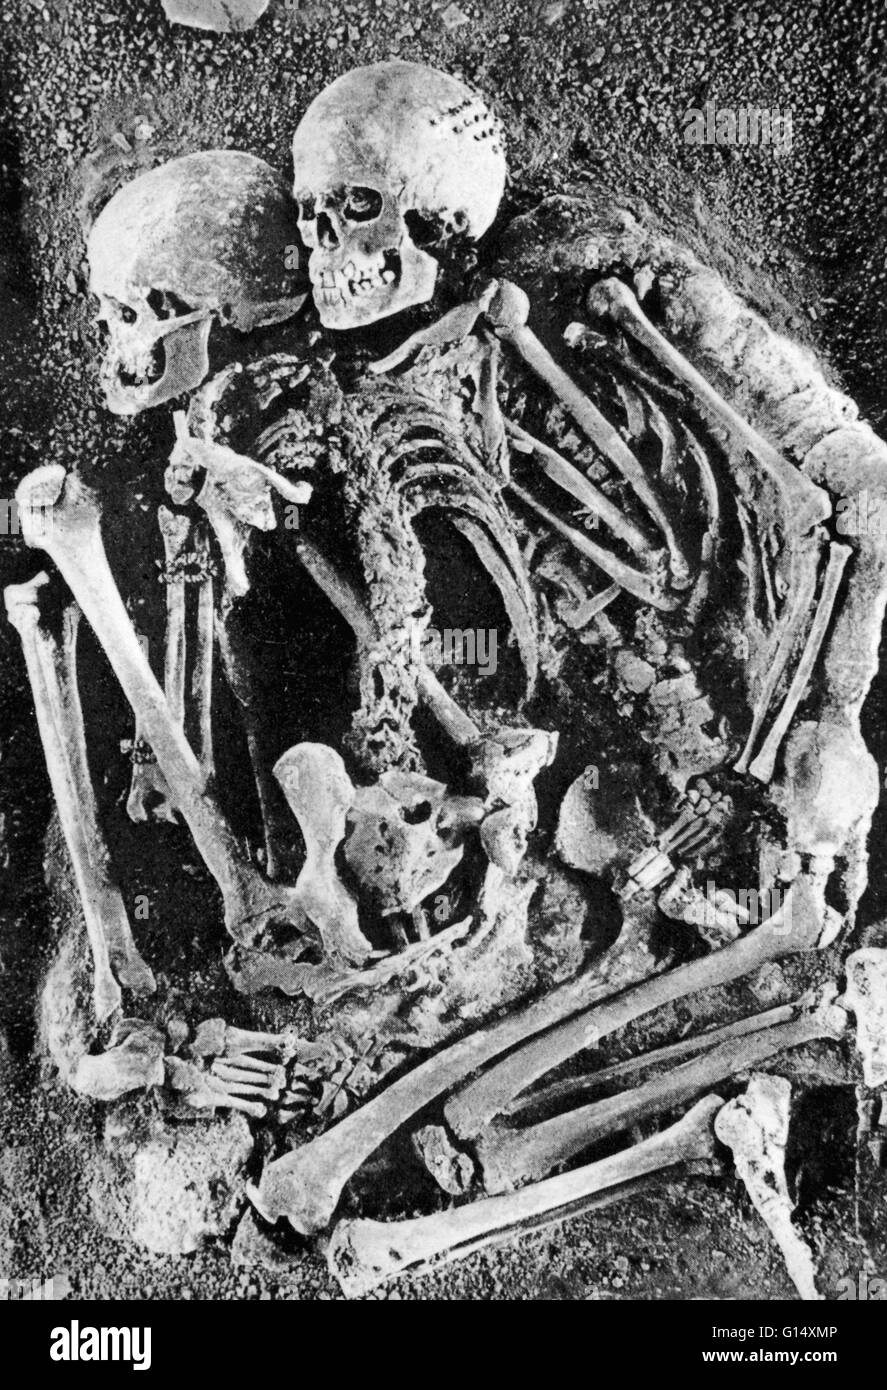 Grimaldi skeletons. Fossilized 'Grimaldi' skeletons, human remains approximately 30,000 years old. These humans were originally thought to have produced descendents who migrated through Europe into Africa, where they evolved into Homo sapiens. They were l Stock Photo